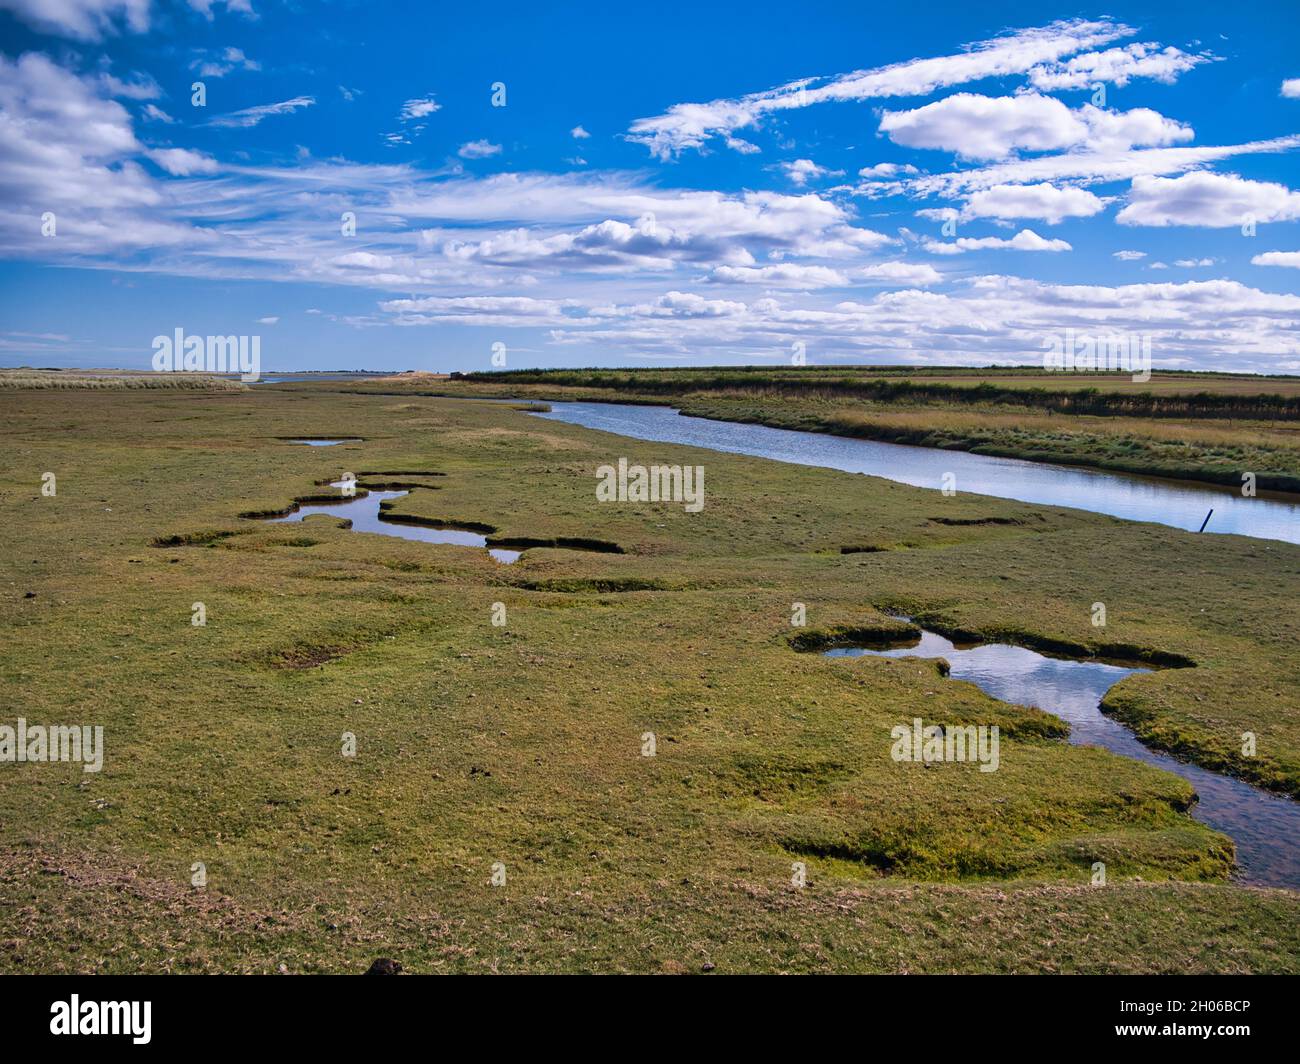 Coastal wetlands in Northumberland, England, UK. Taken on a sunny day in summer with blue sky and white clouds. Stock Photo